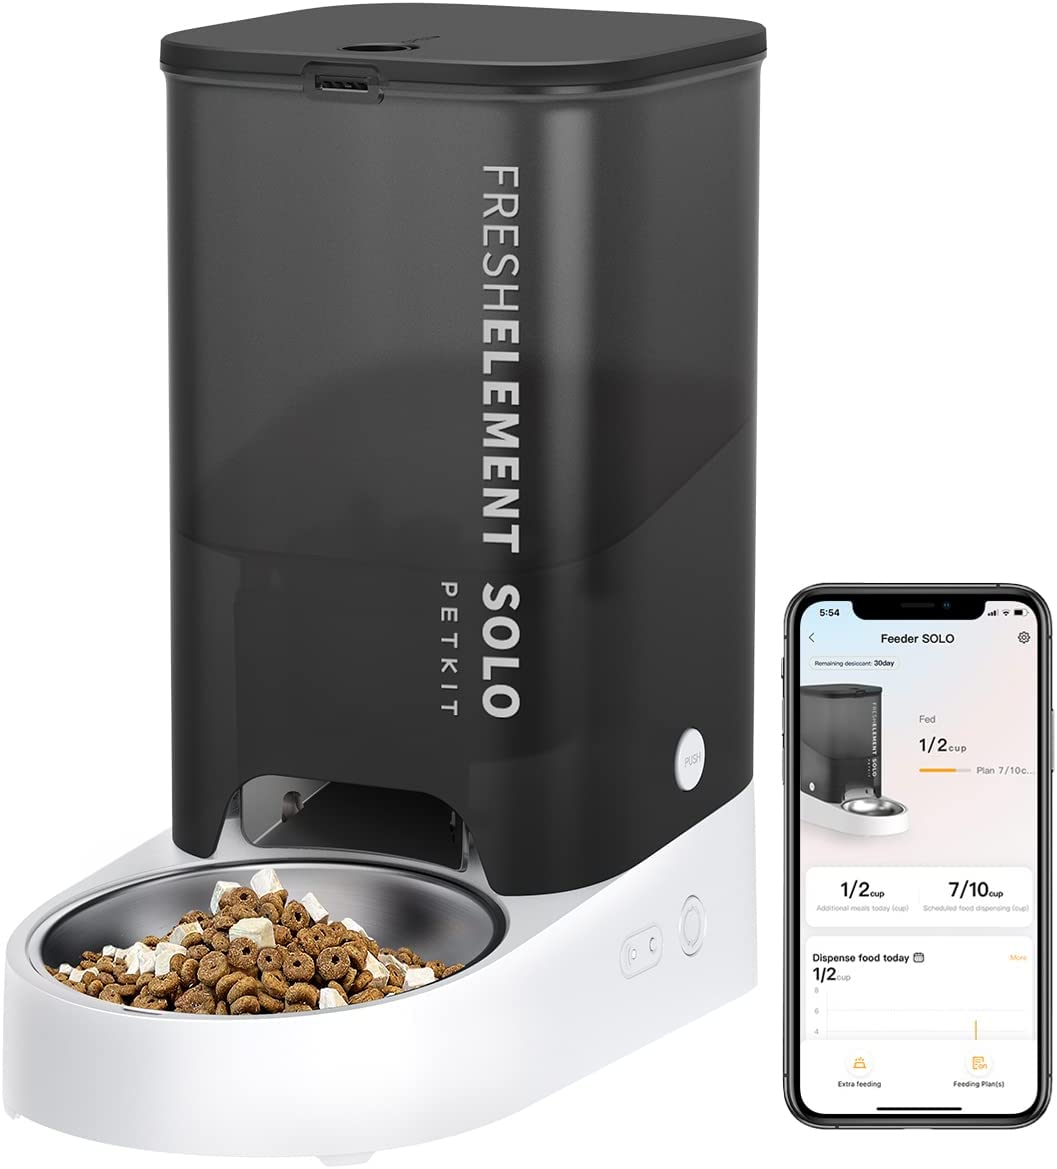 PETKIT Automatic WiFi Cat Feeder, APP Control for Remote Feeding & Monitor, Schedule Up to 10 Meals Per Day